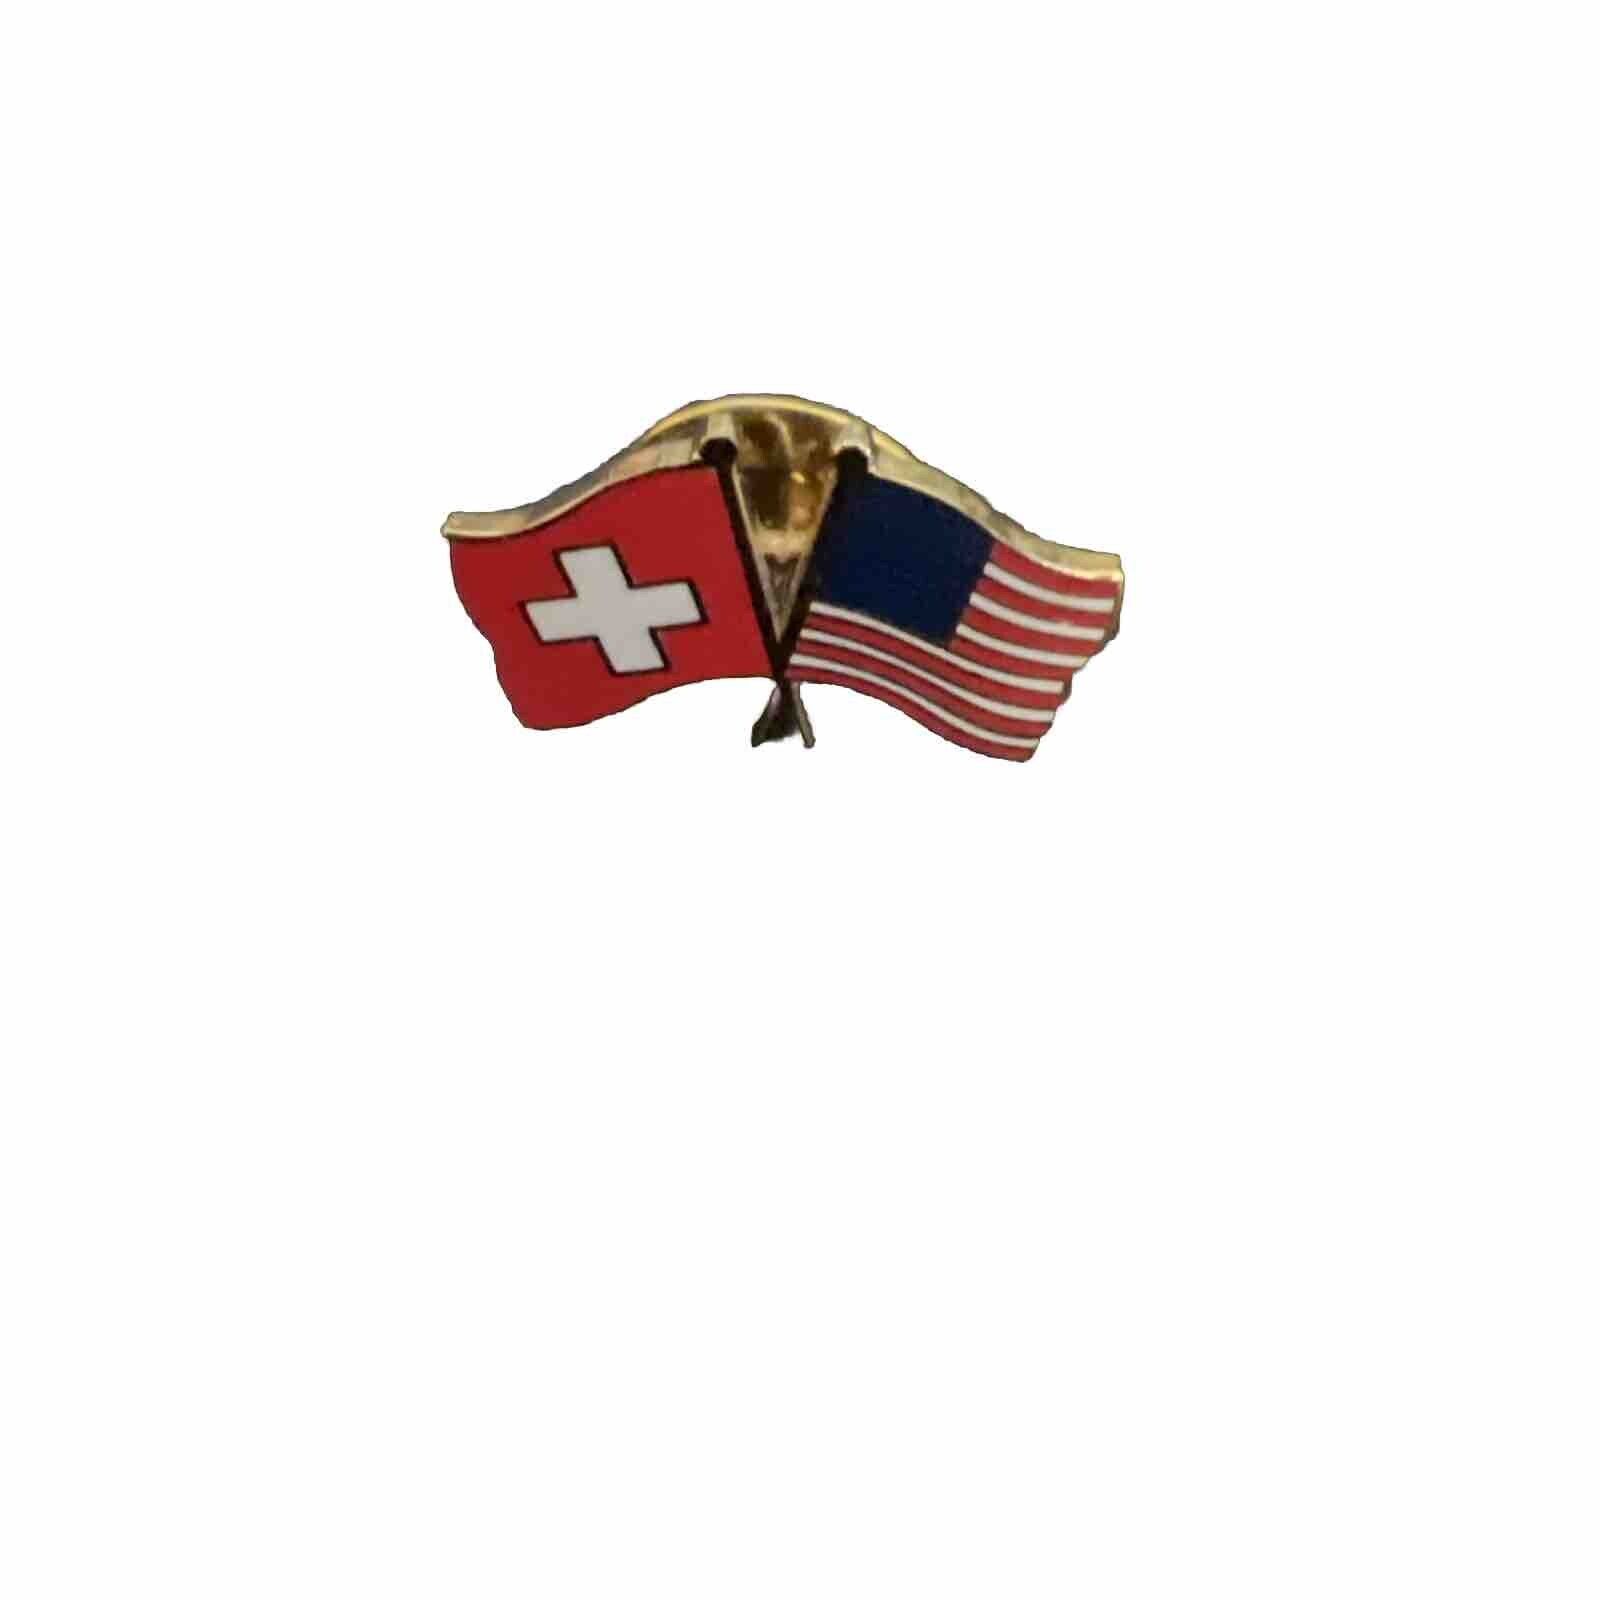 USA AMERICAN FLAG & SWITZERLAND FLAG Lapel Pin Swiss Crossed Double Flags